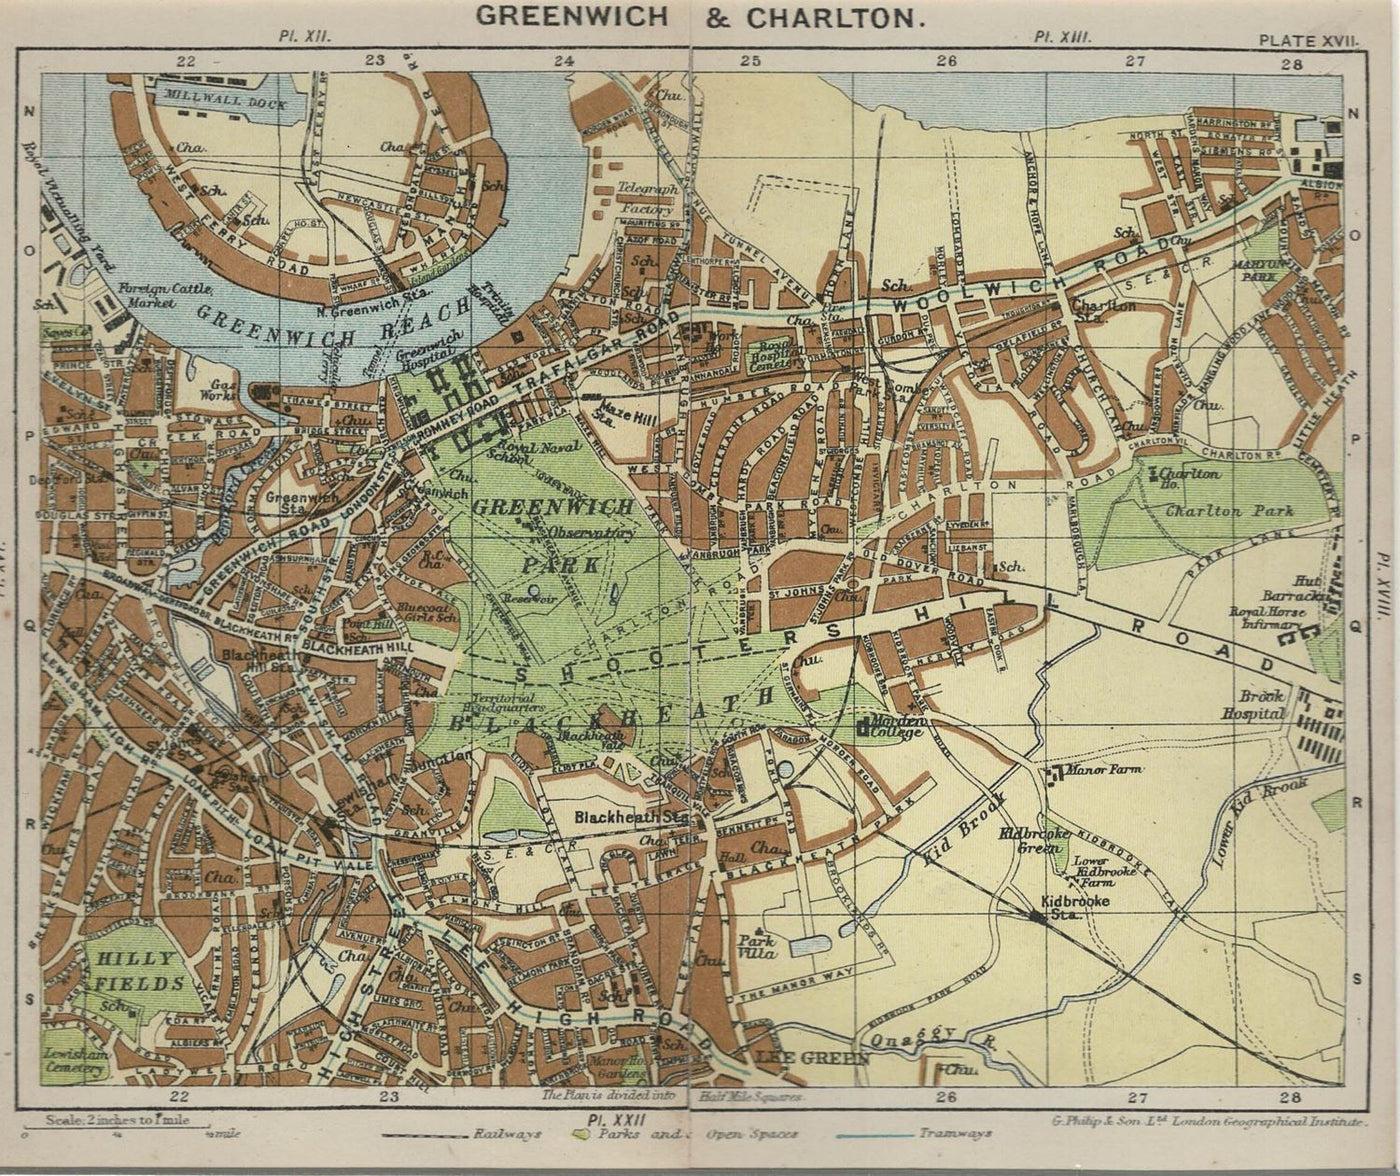 Greenwich and Charlton, Antique Map, 1915